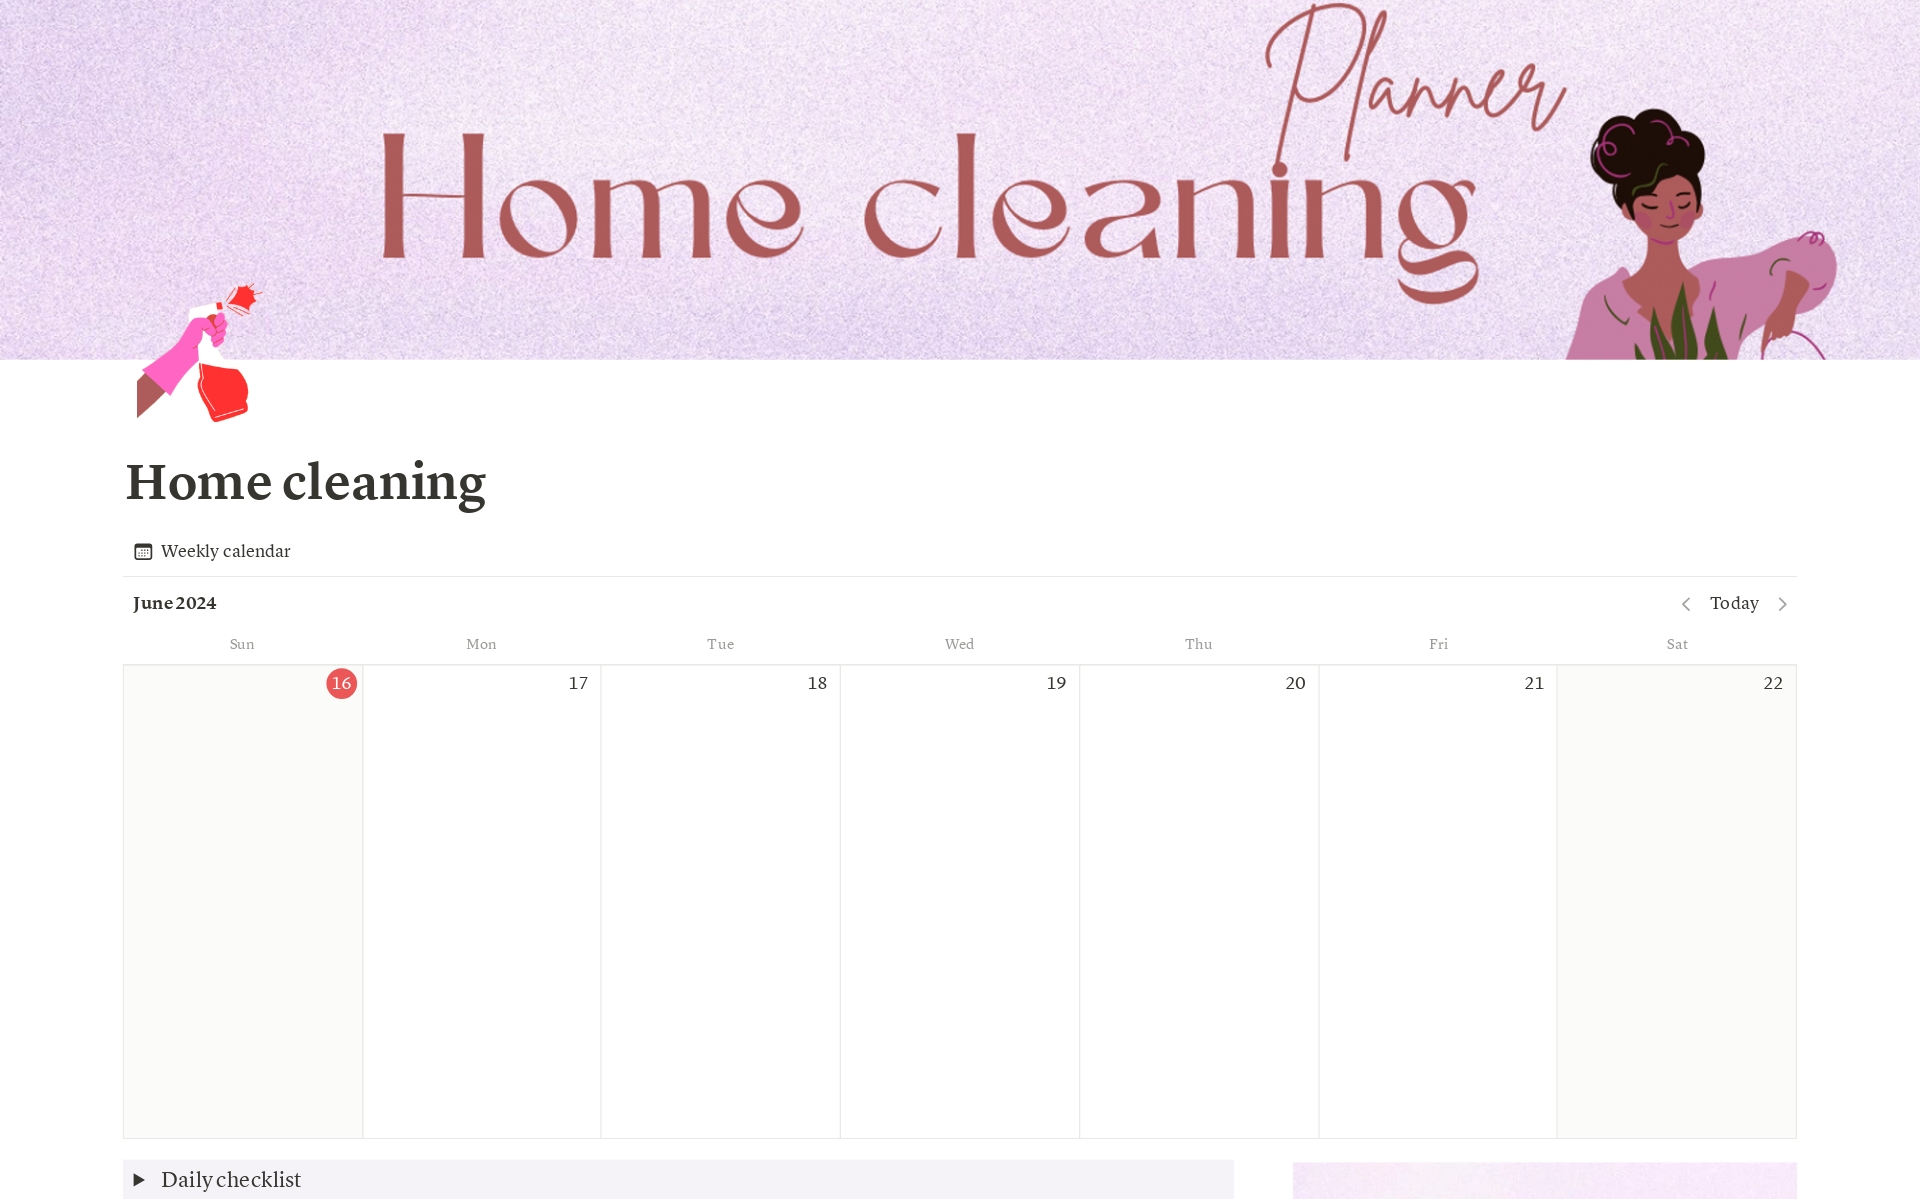 The home cleaning planner is divided in to 4 sections:
weekly calendar
Daily checklist
Refill checklist
6 Templates

The 6 Templates include:
Bedroom cleaning list
Living room cleaning list
Kitchen cleaning list
Bathroom cleaning list
Office cleaning list
Miscellaneous